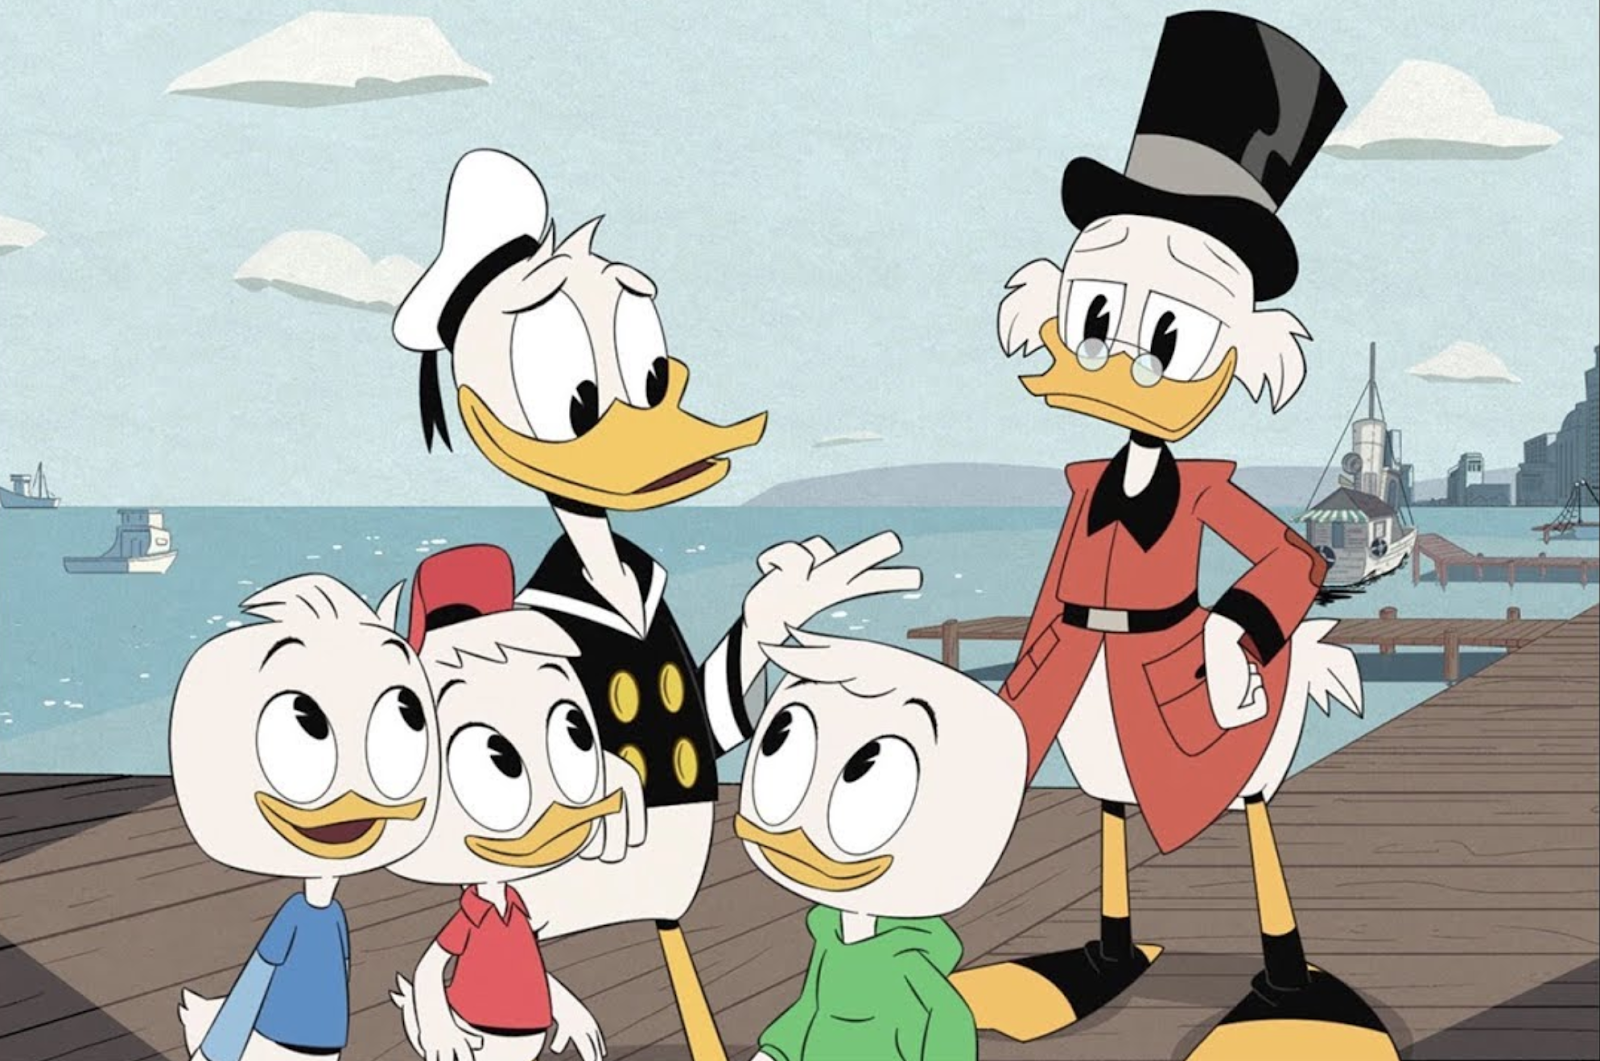 Usa Season 2 Of Ducktales Continues On Disney Channel In May - all endings camping 2 2019 august l roblox roblox